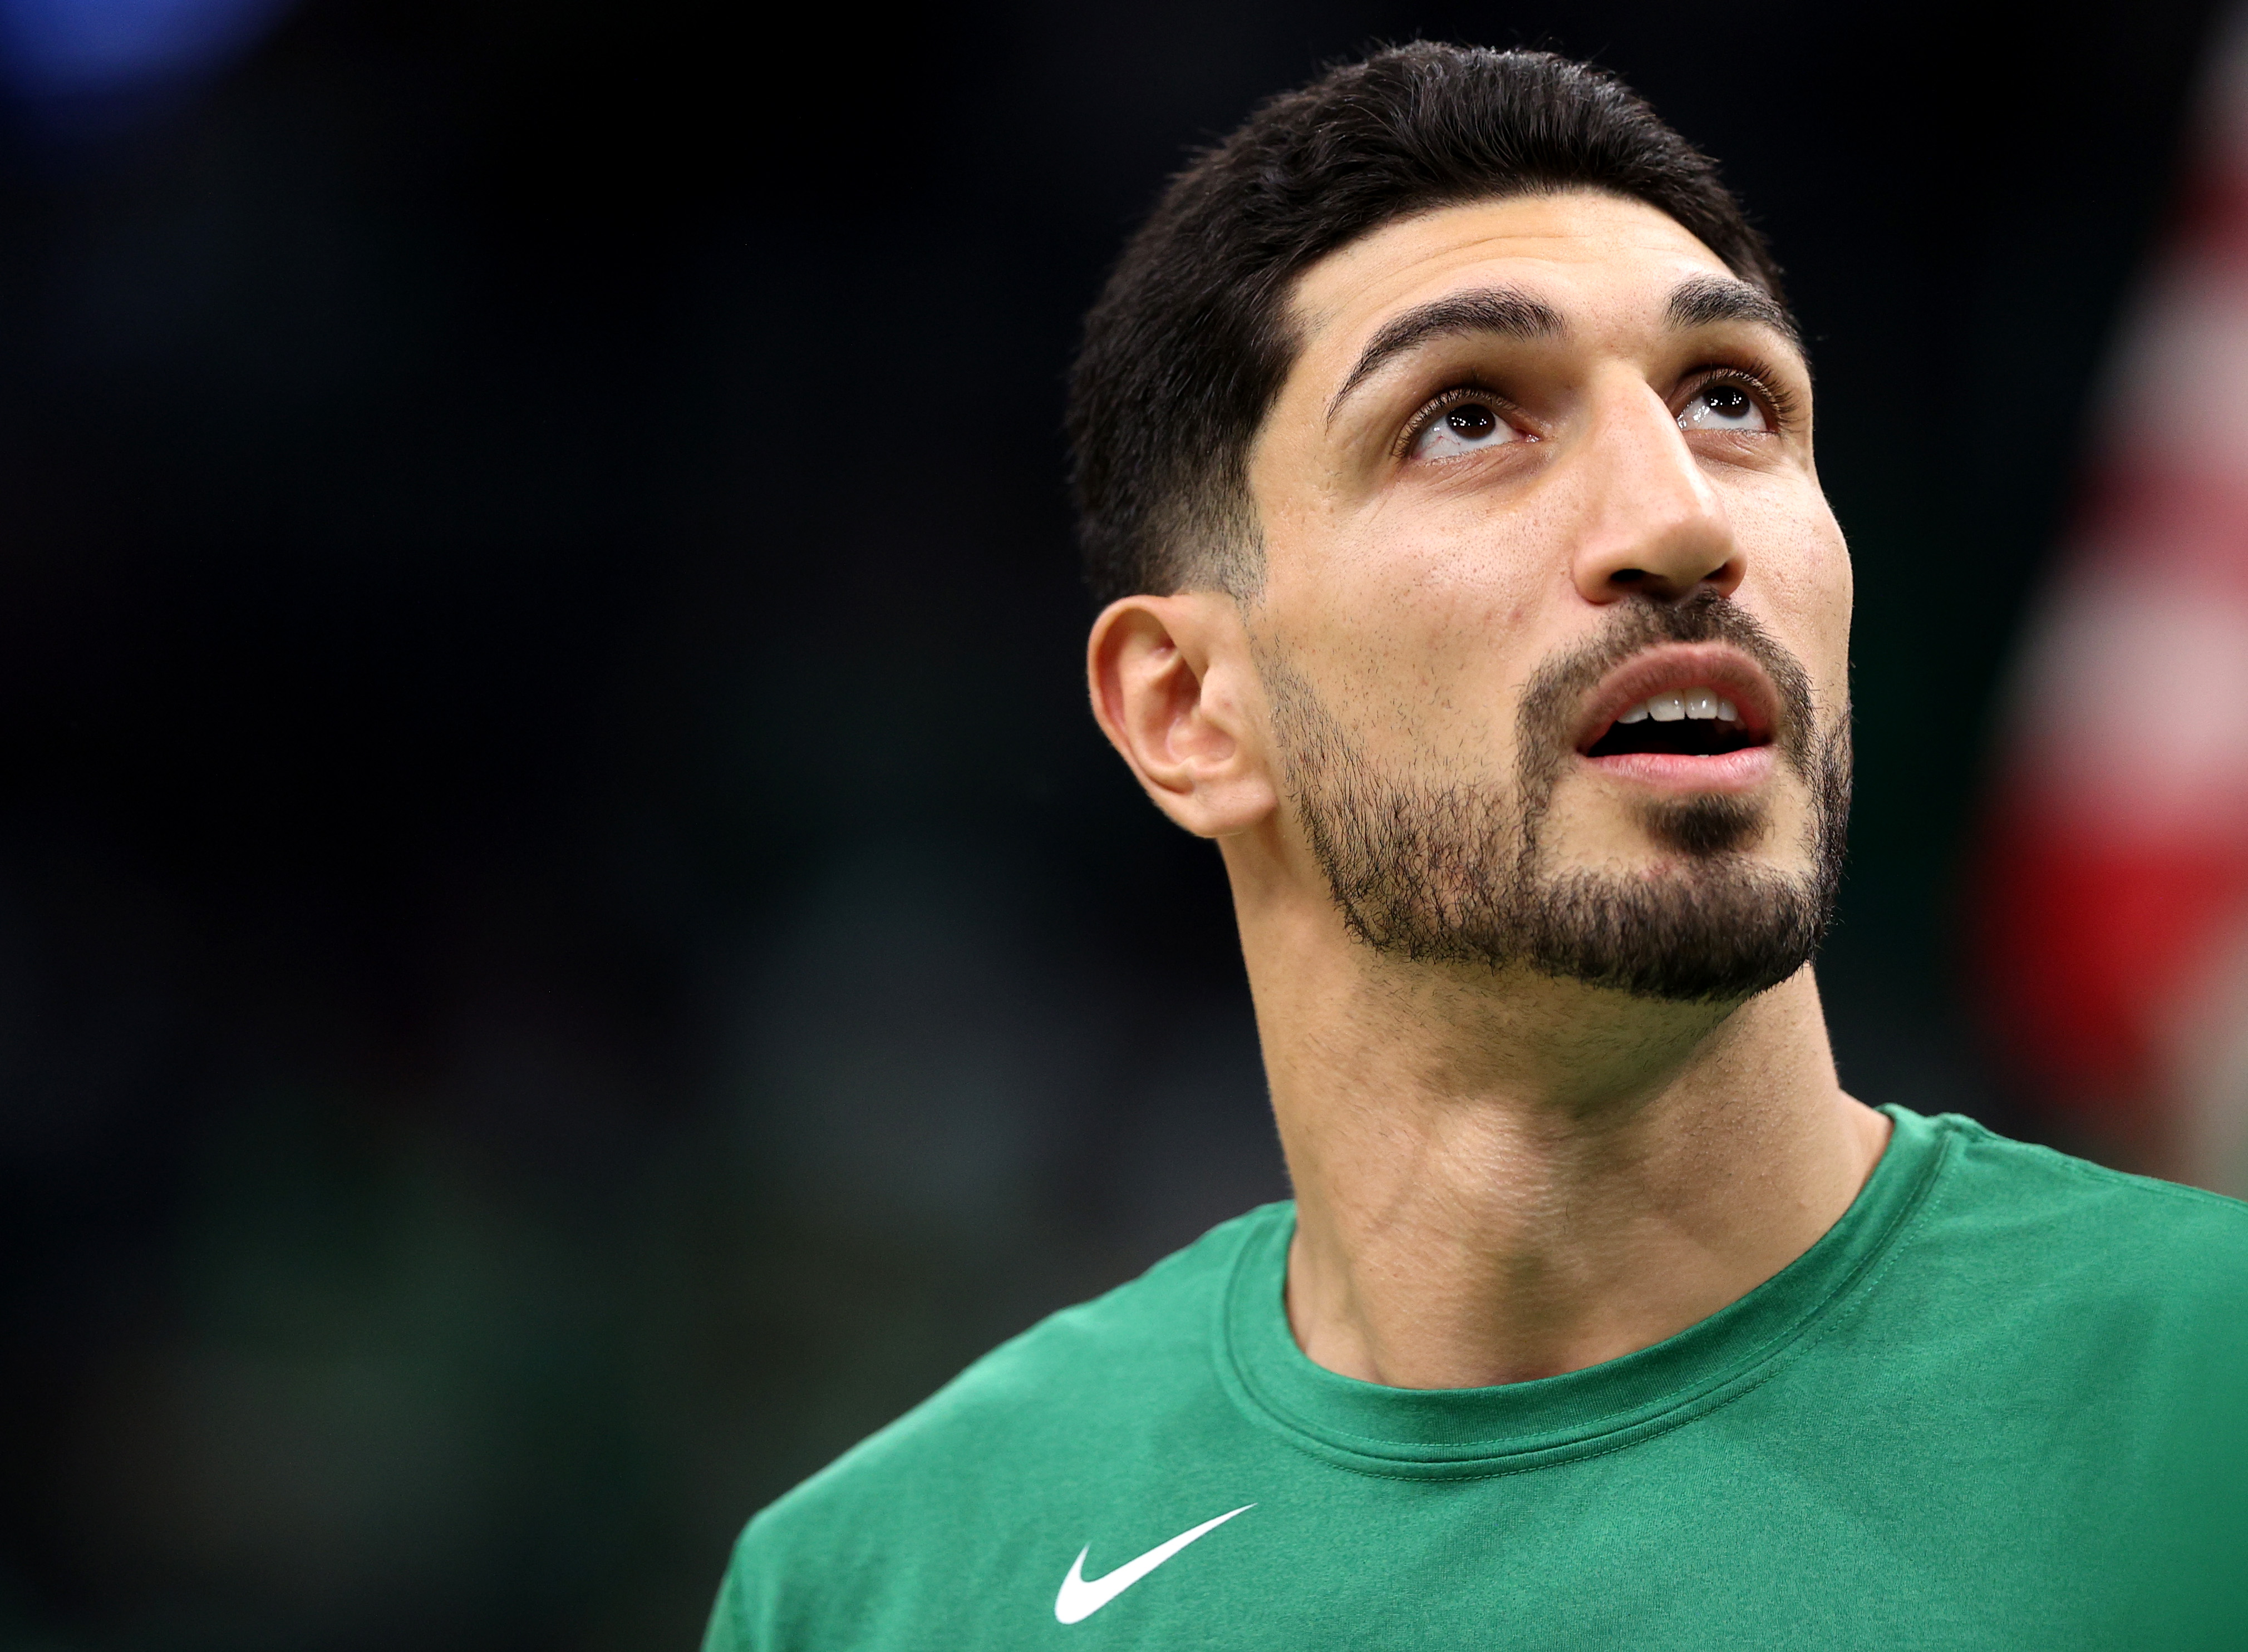 Enes Kanter felt encouraged to speak out against China after NBA supported players fighting other injustices 17